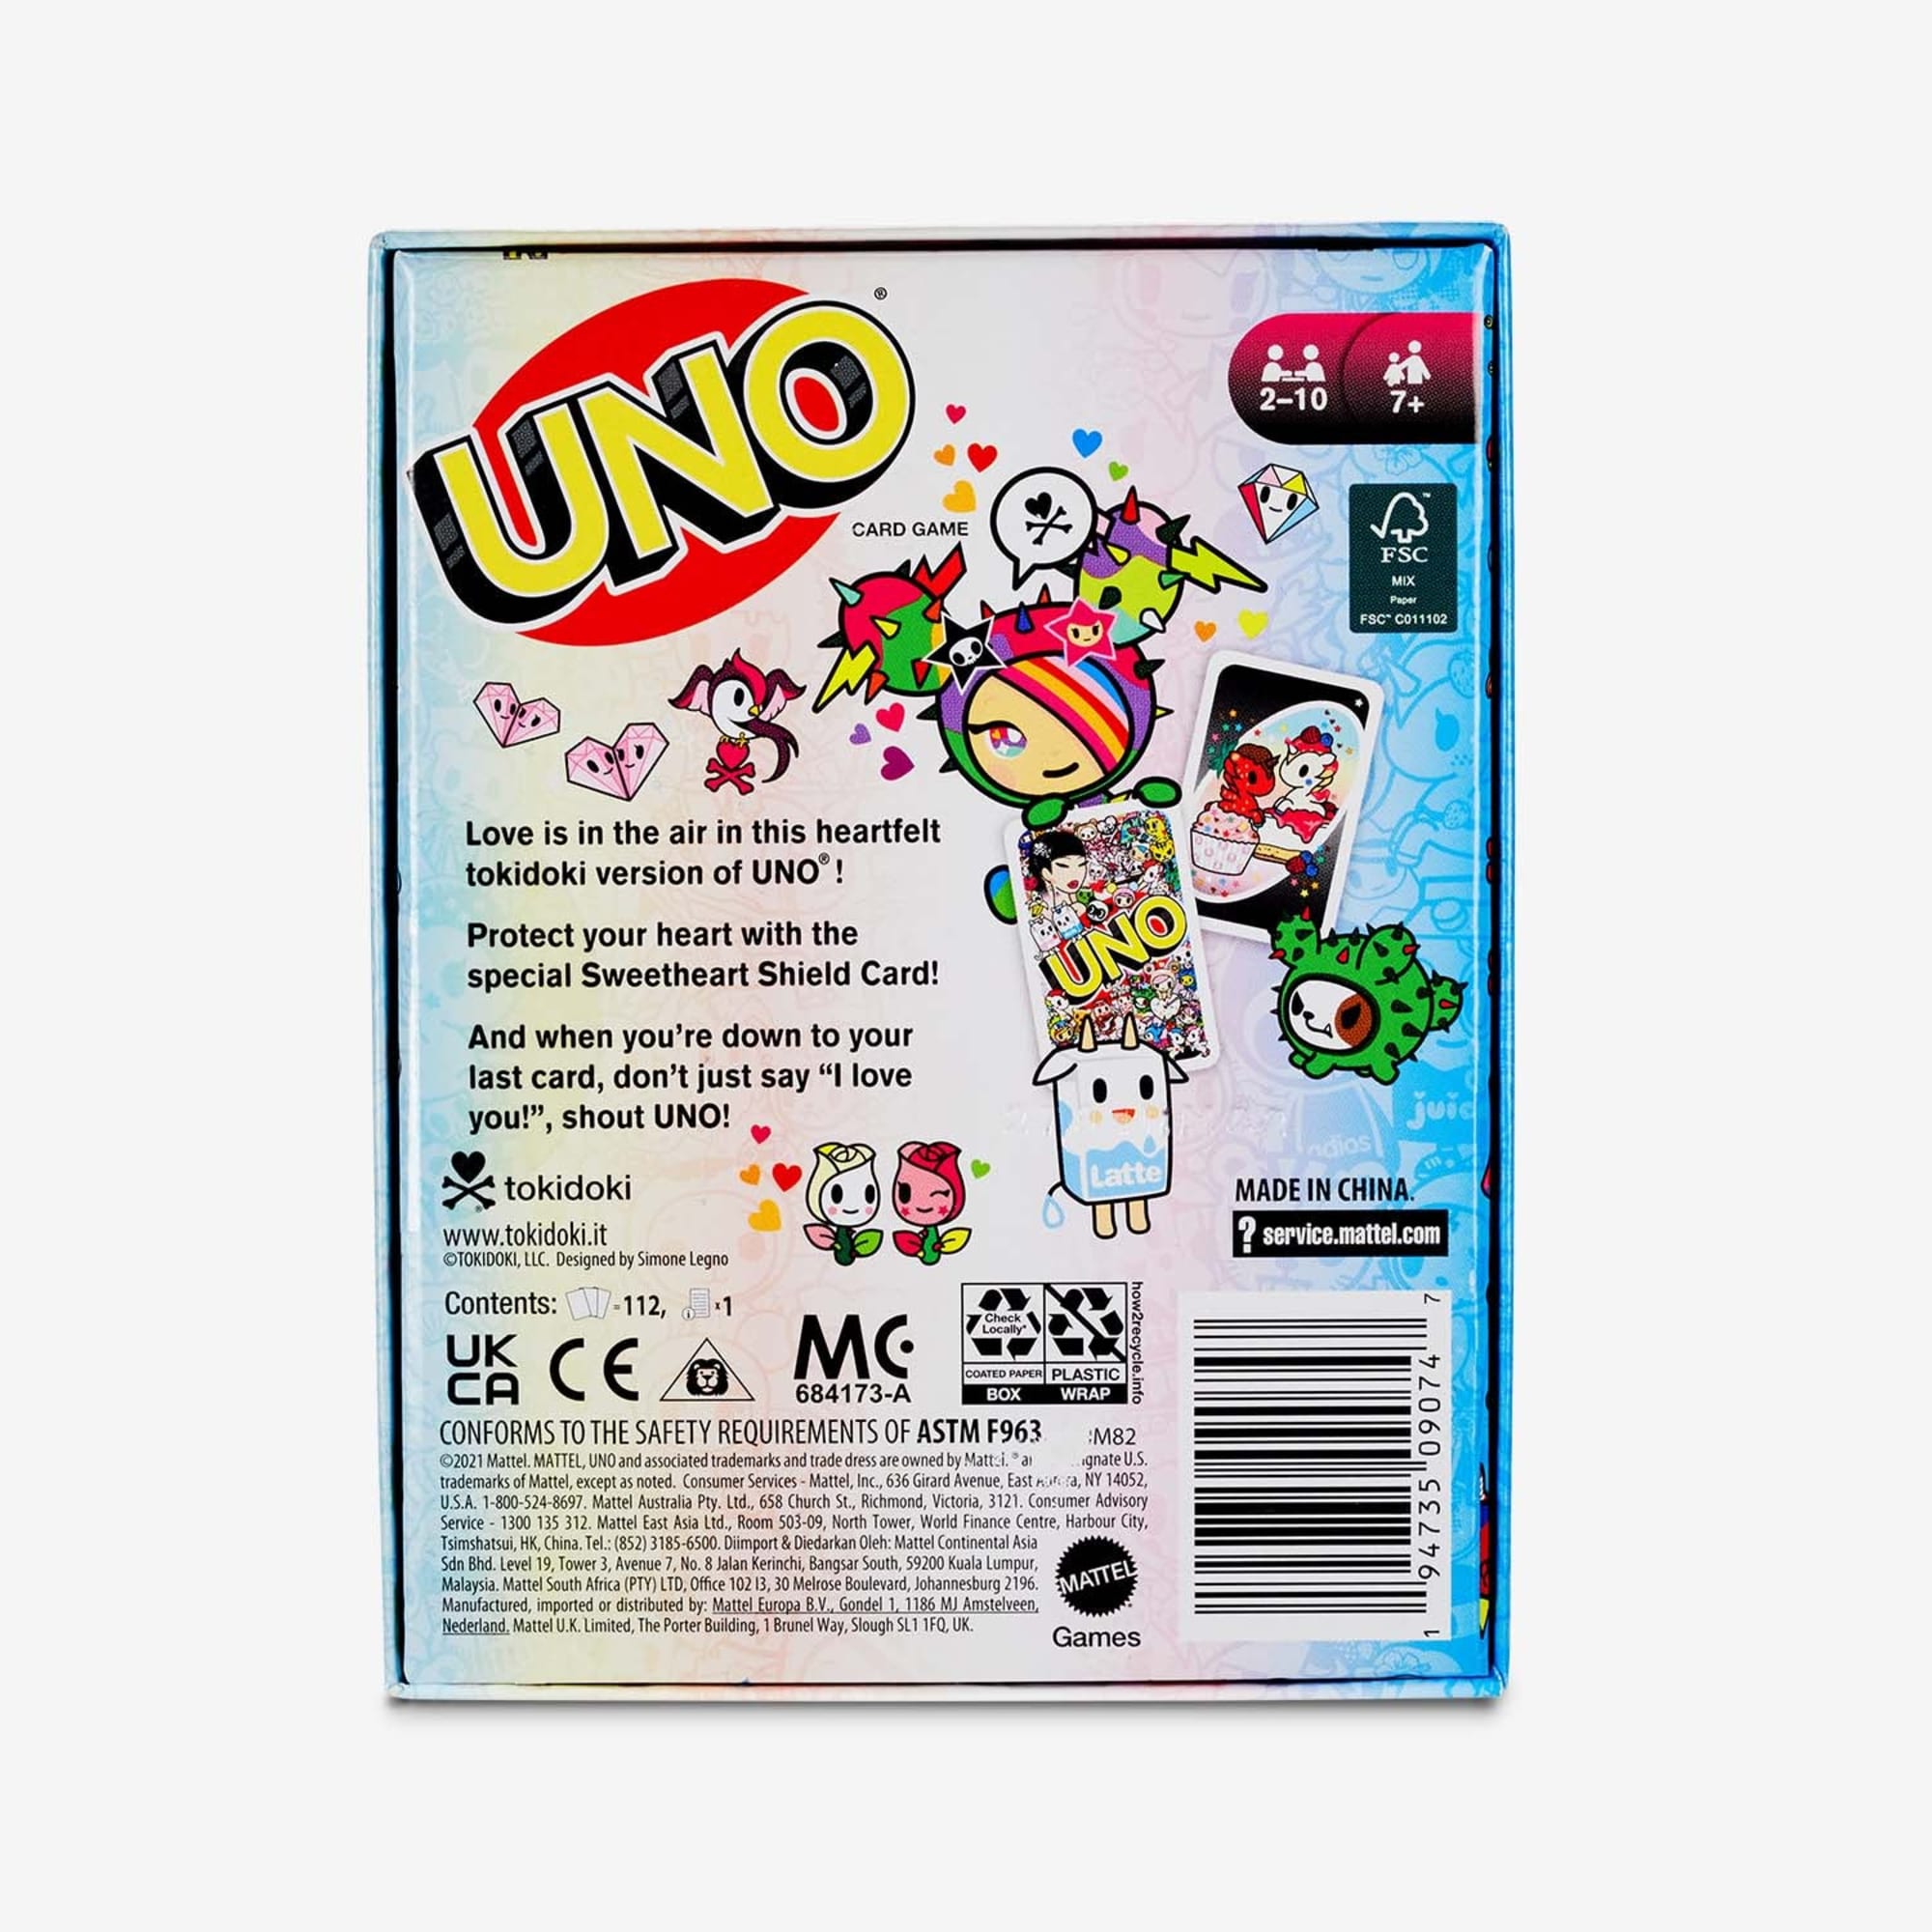 Uno-Card Revers Rules Game by Casino Games Market Place LLC